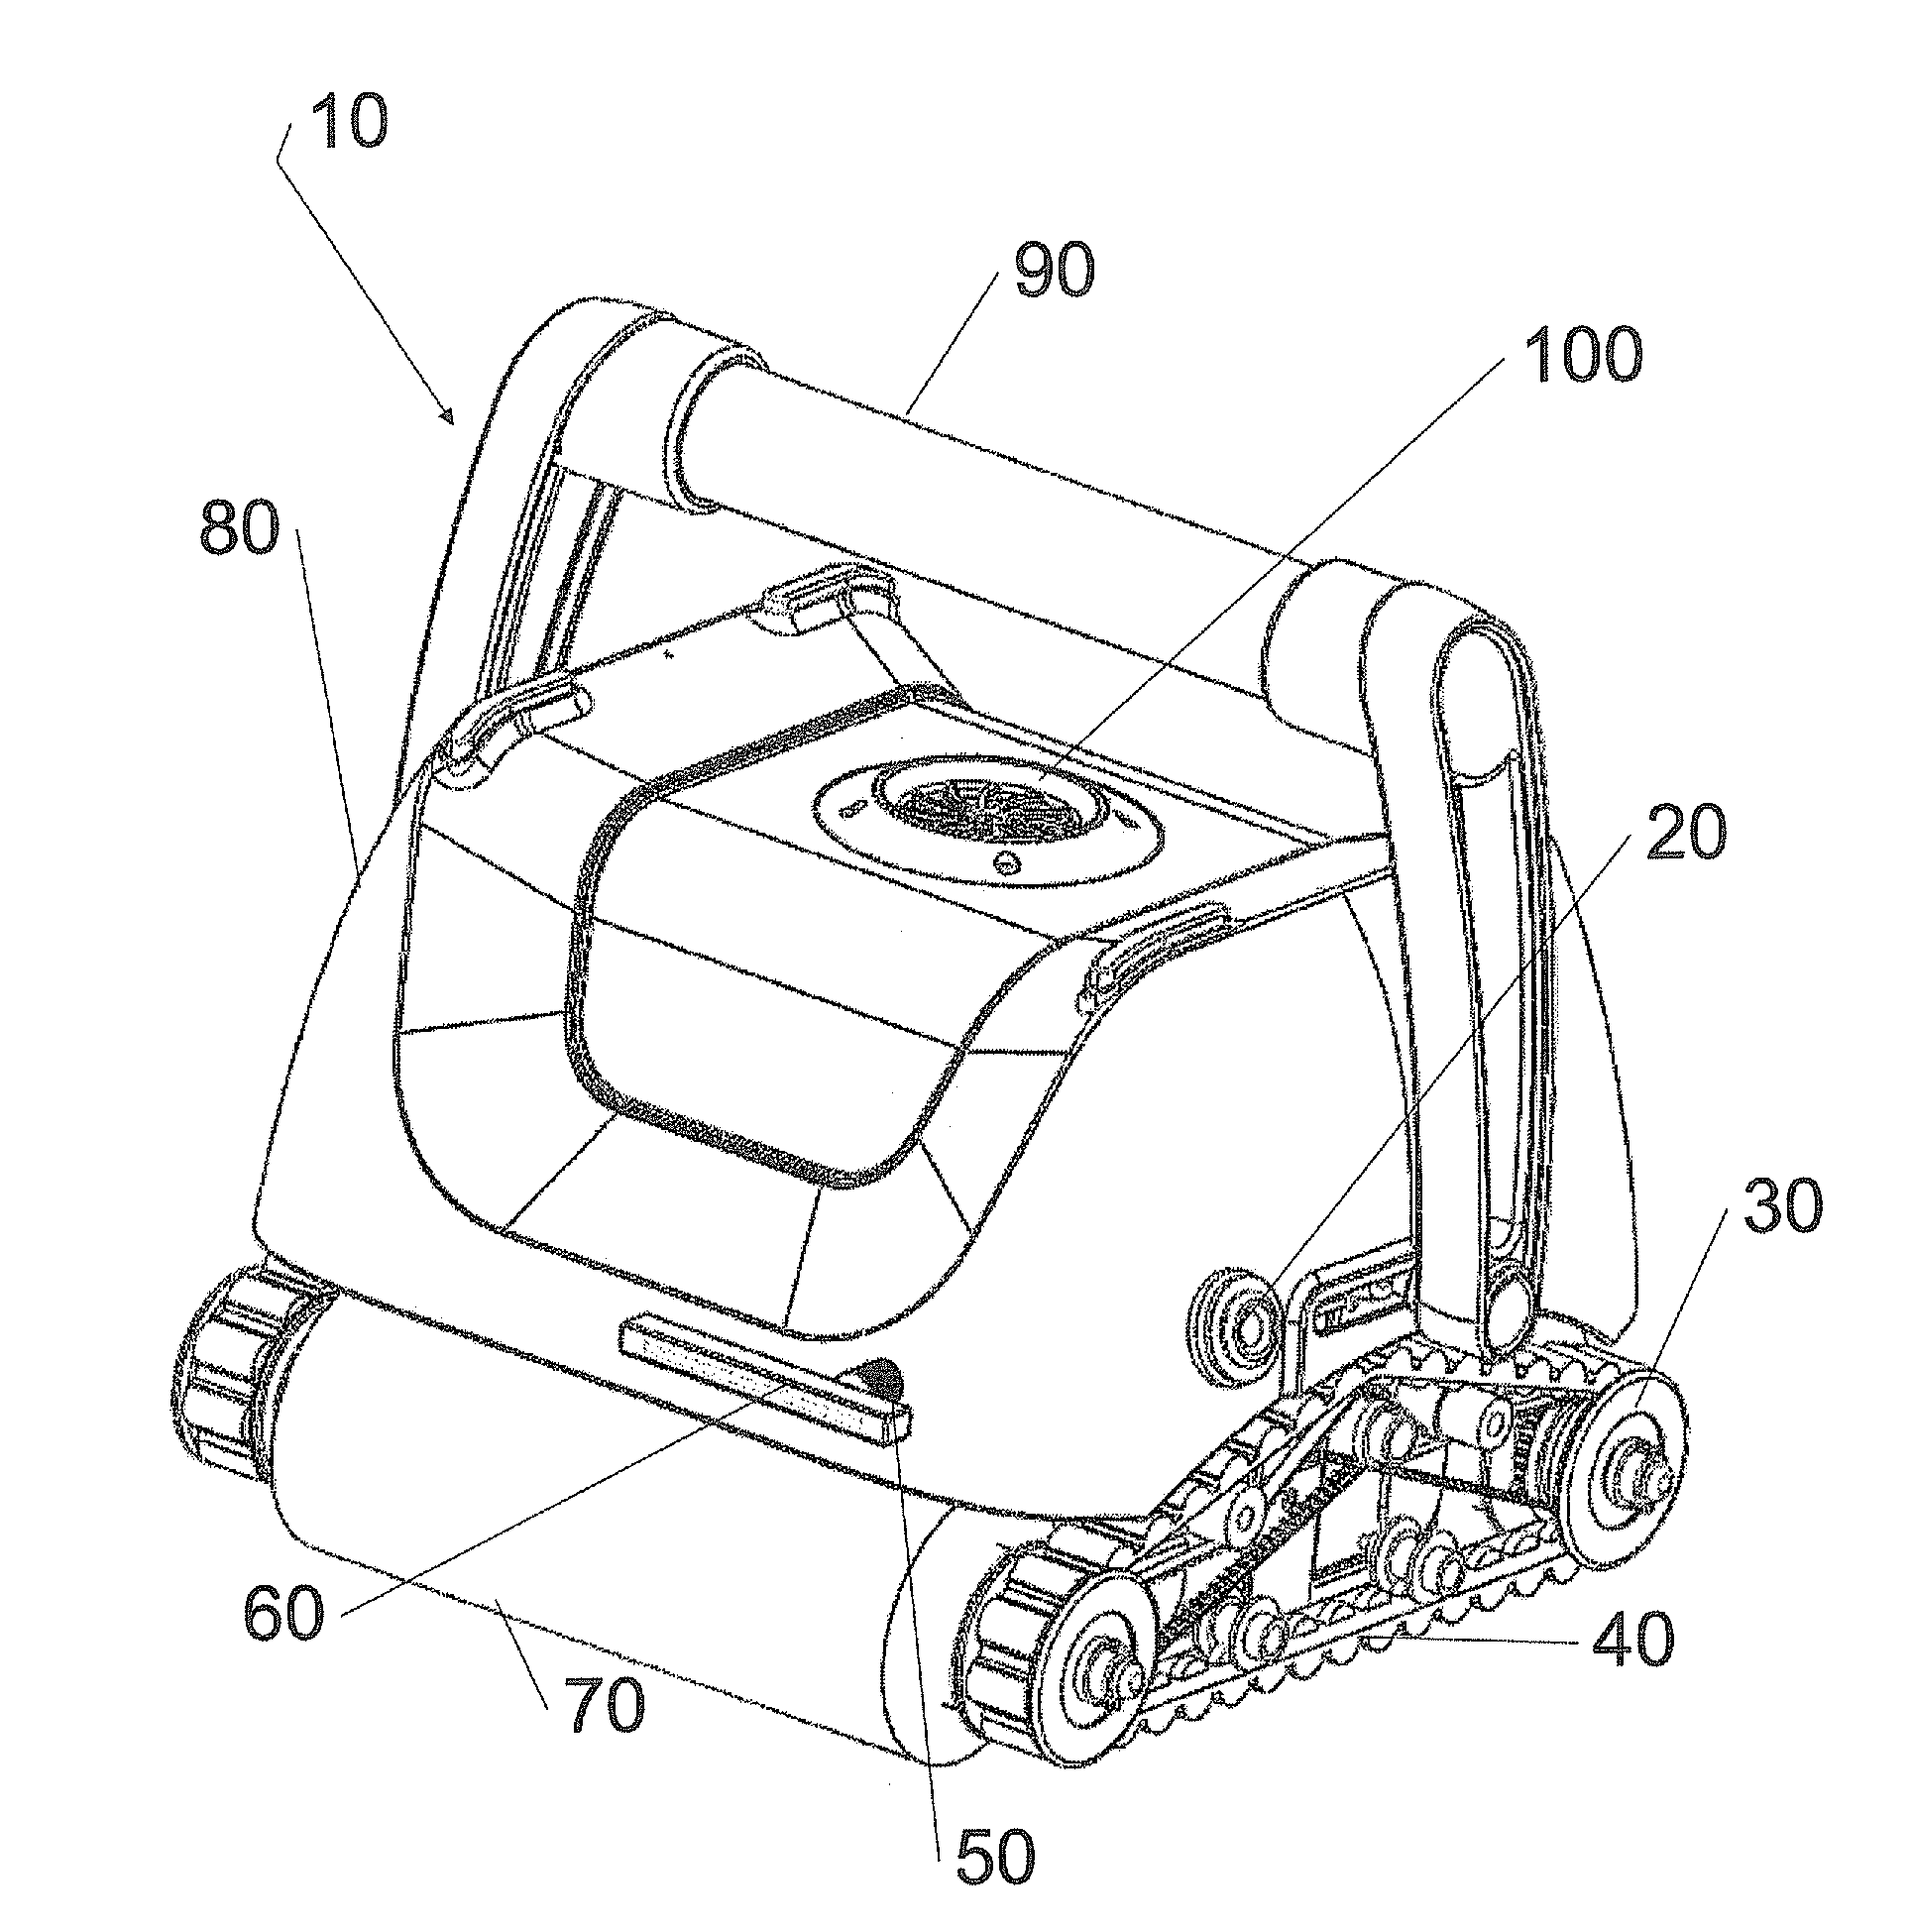 Automatic pool cleaner for cleaning a pool with minimum power consumption and method thereof